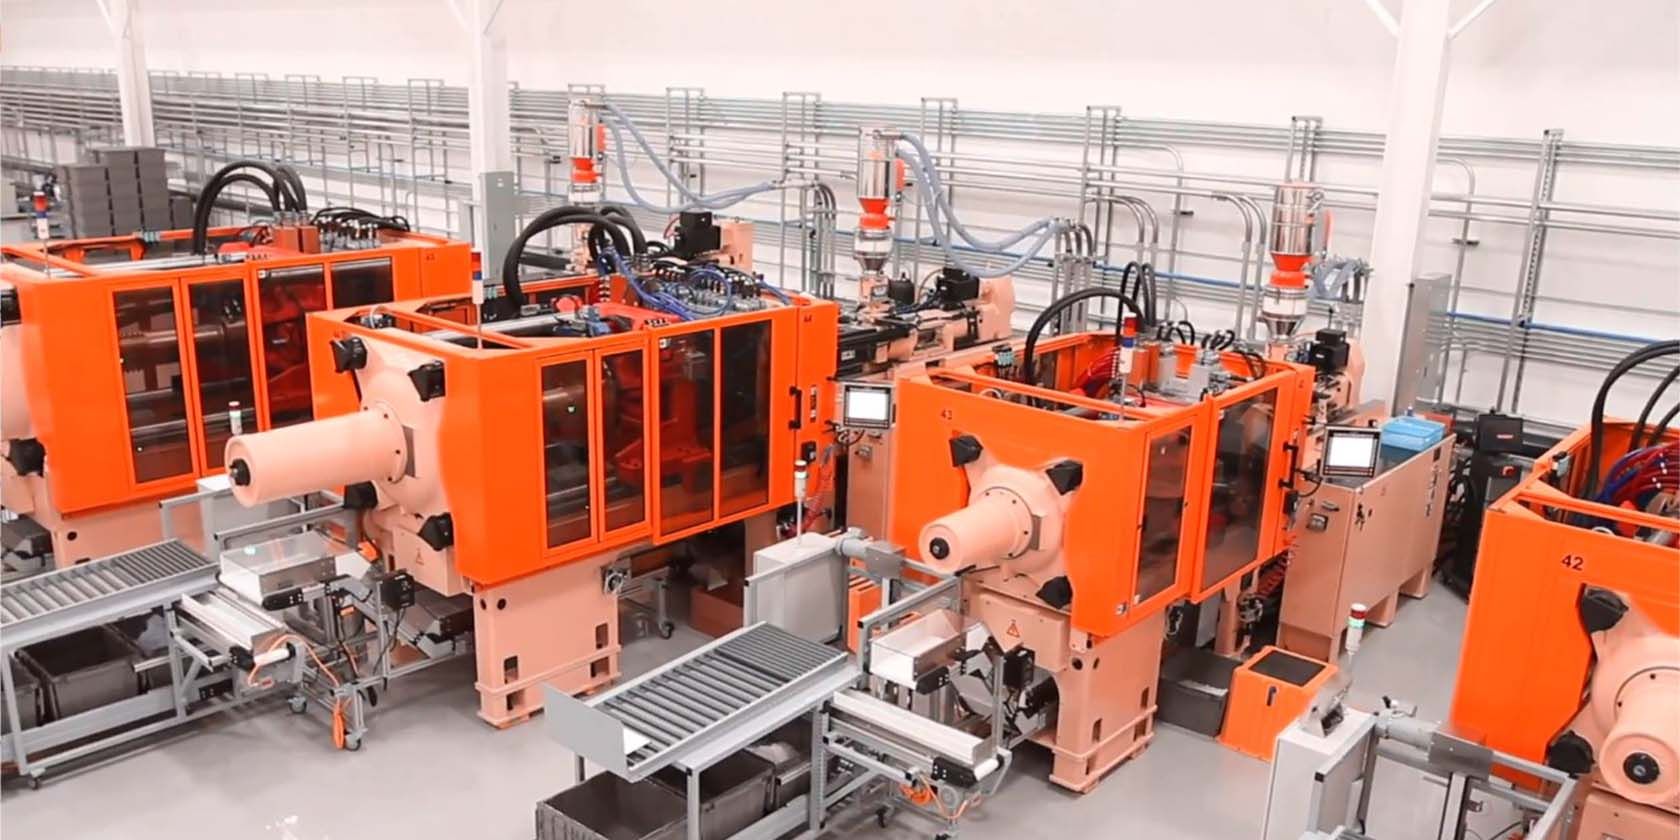 Creating products using Injection molding machines